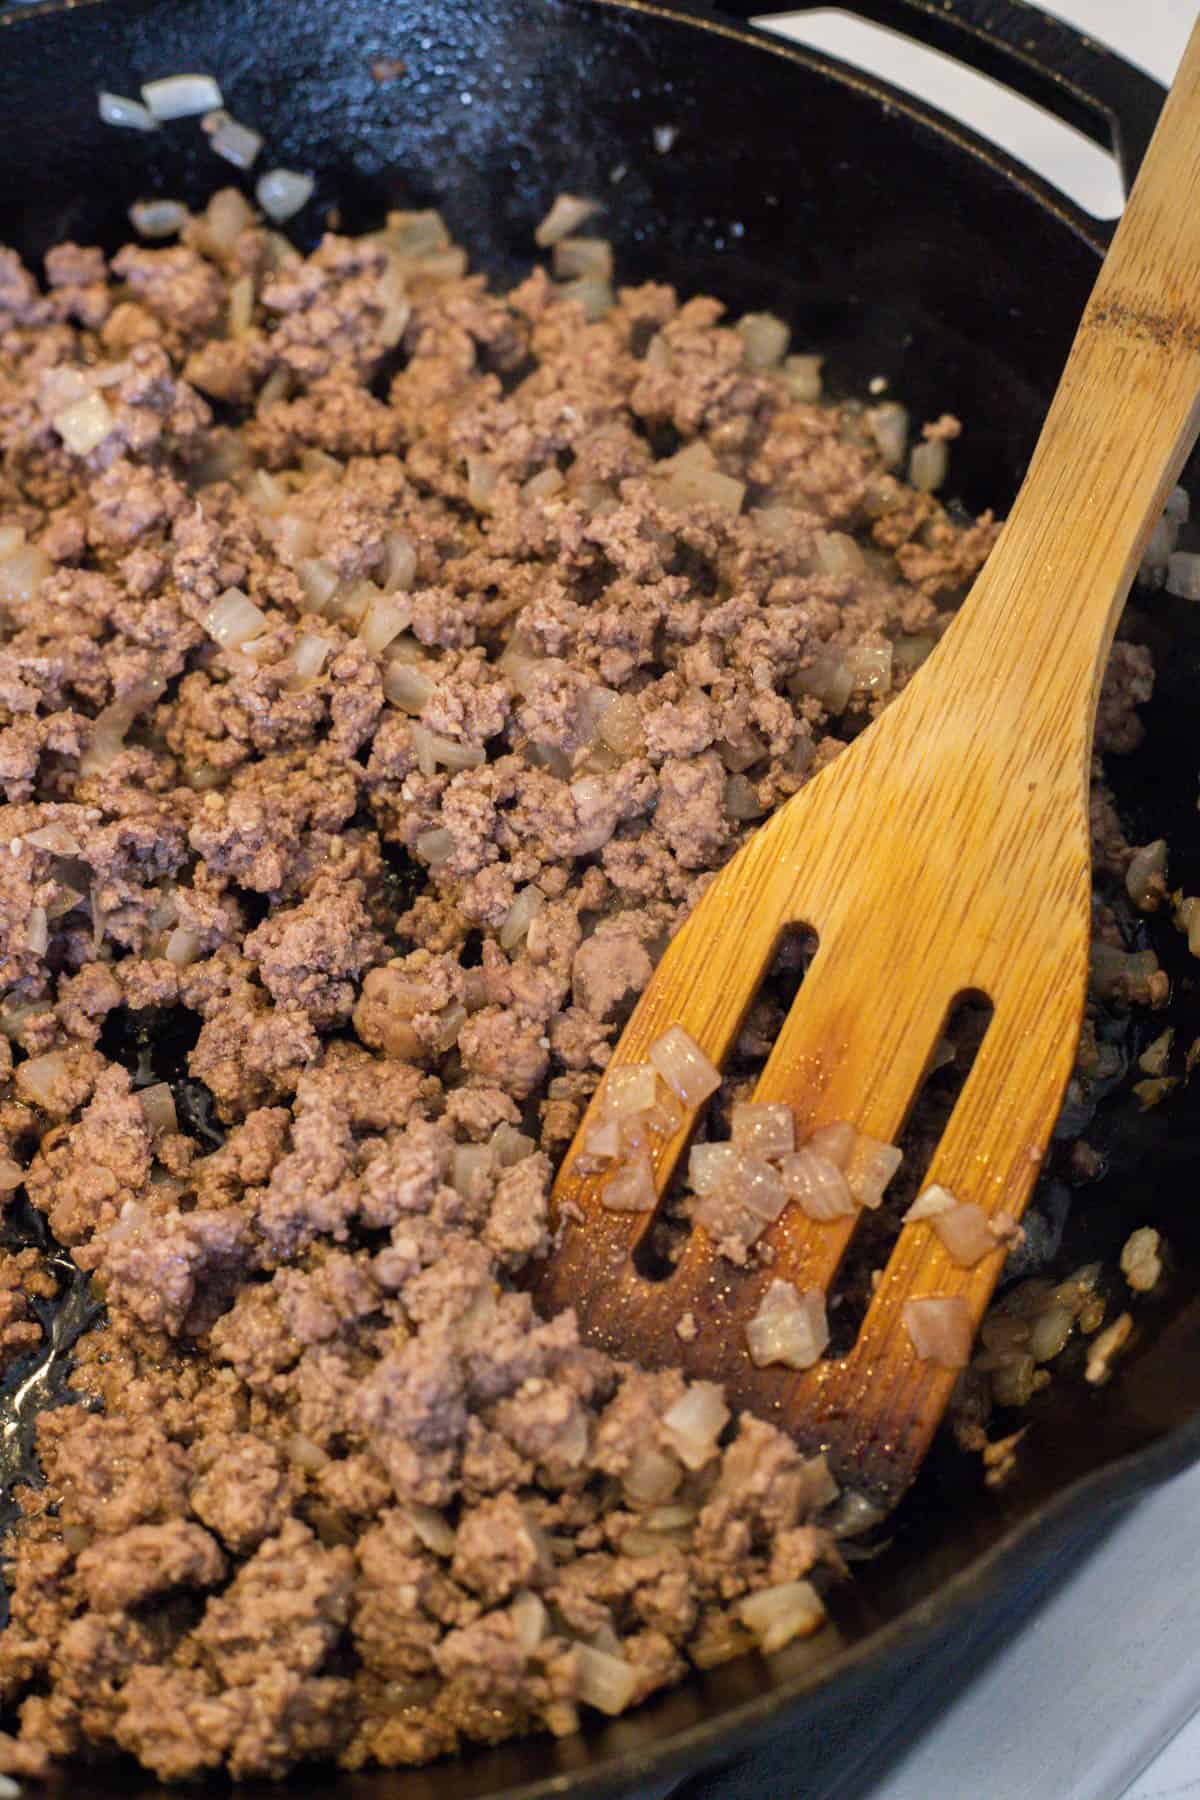 A pot of cooking ground beef.